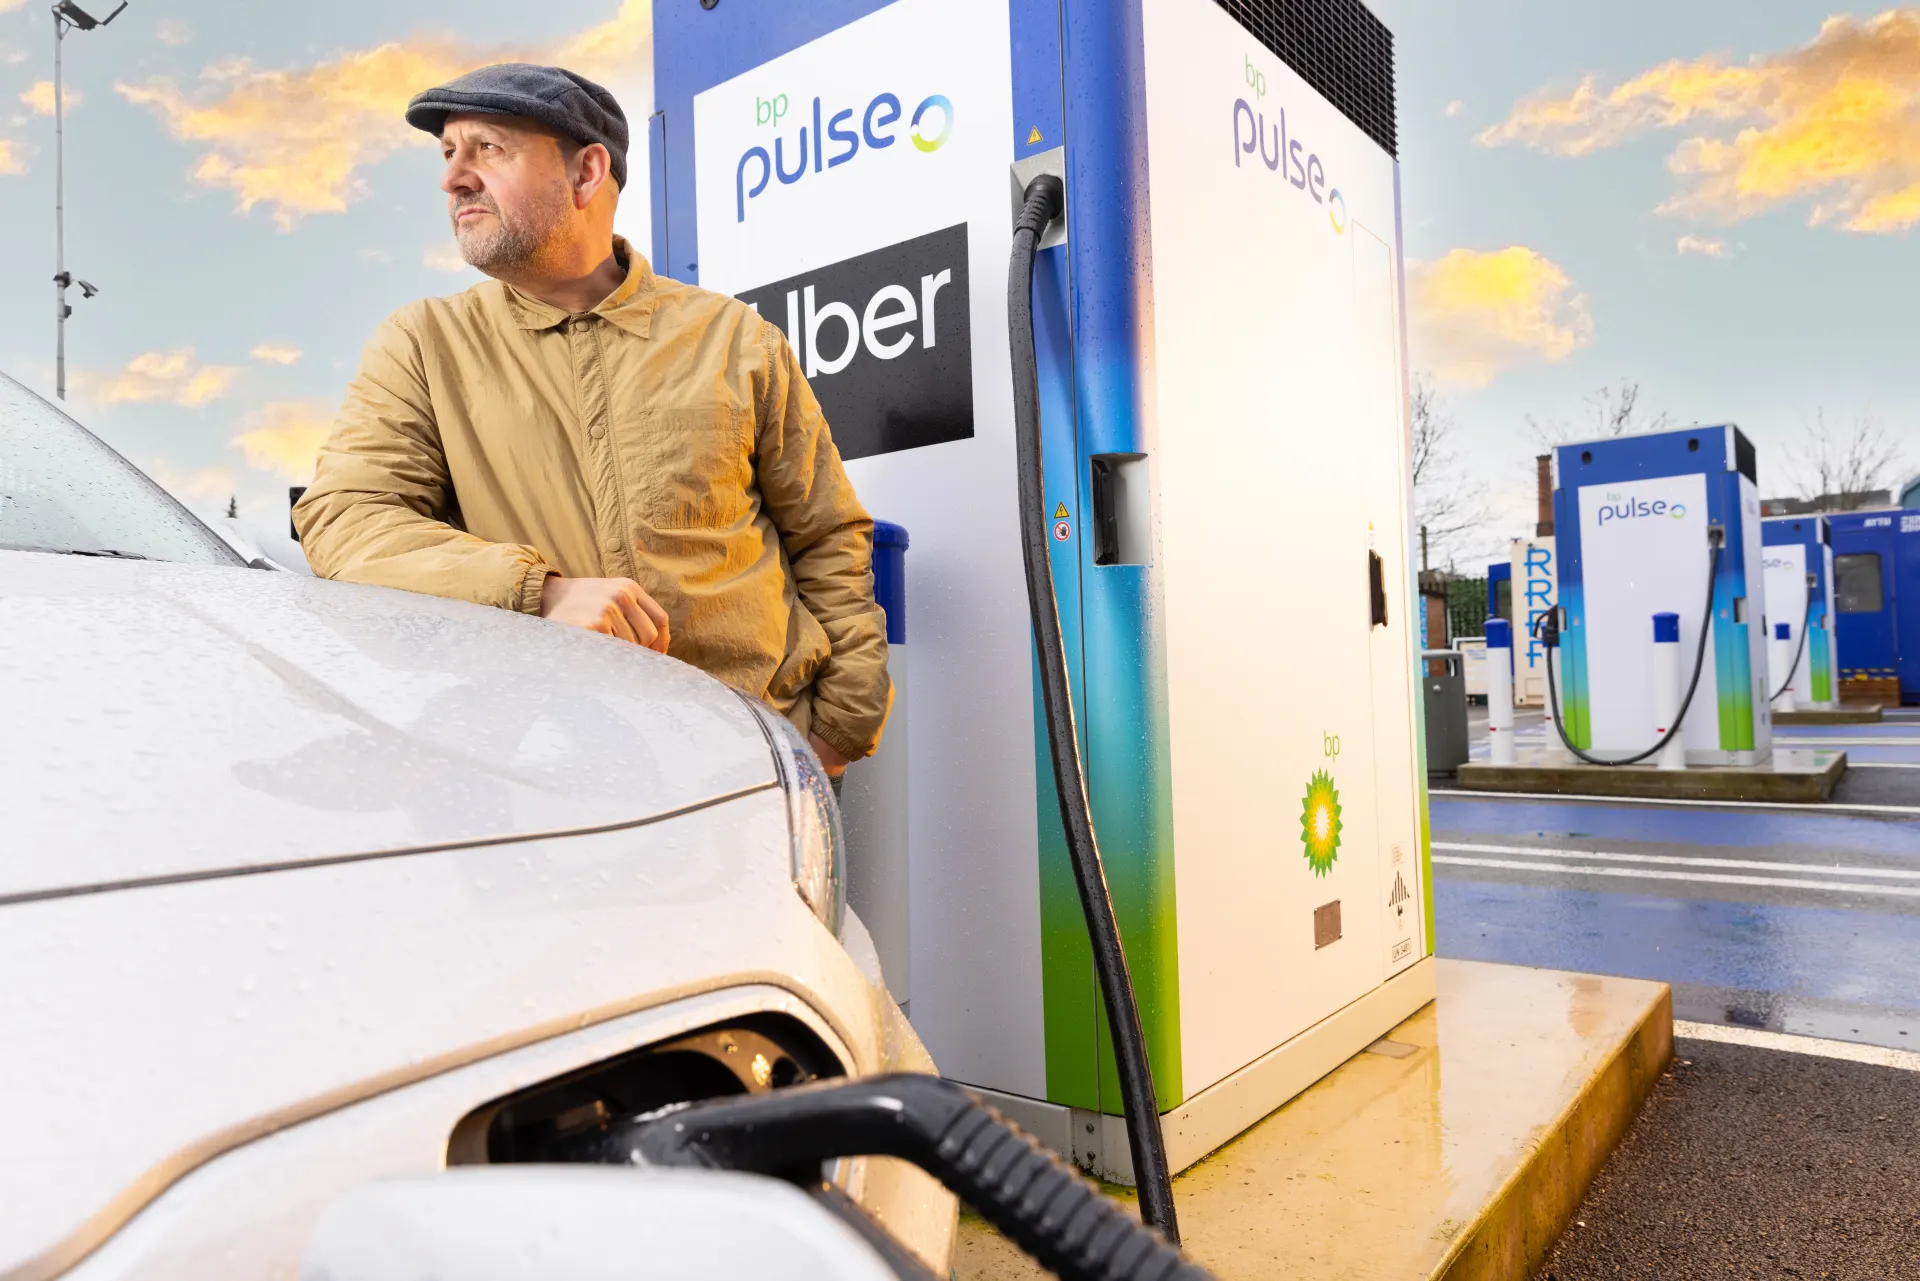 bp pulse and Uber team up on driver charging